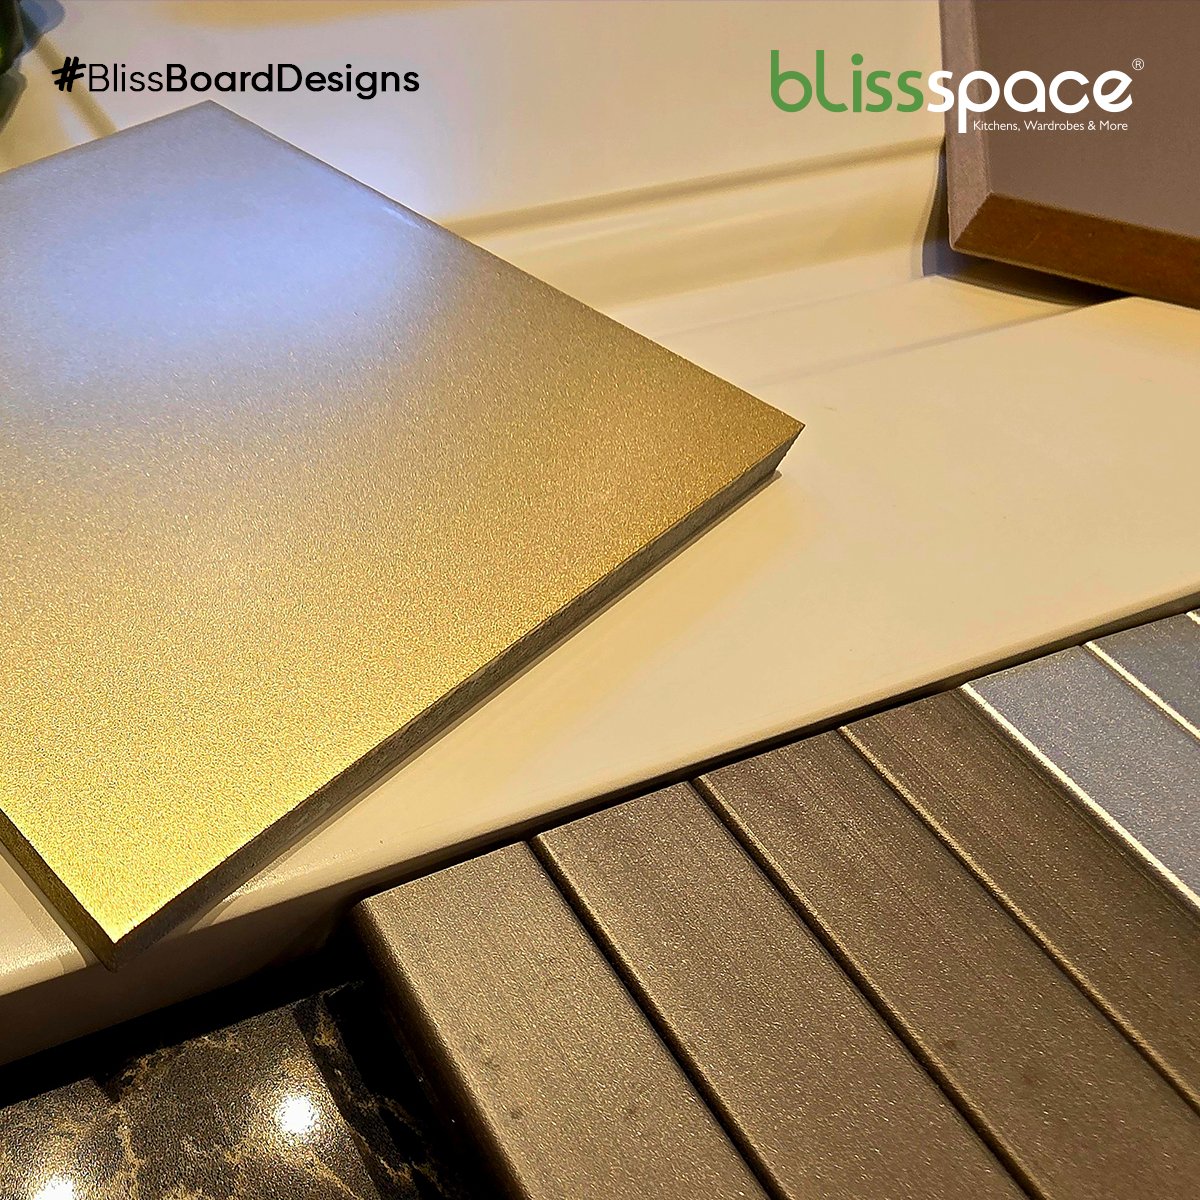 Create your neutral space that fits the mood every day!

#BlissspaceIndia #Blissspace #BlissspaceDesigns #HomeDesigns  #Interiors #InteriorDesign #LuxuryInteriors #BathroomInteriors #ModularDesigns #ModularSolutions #ModularKitchen #HomesByBlissSpace #BlissSpaceHomes